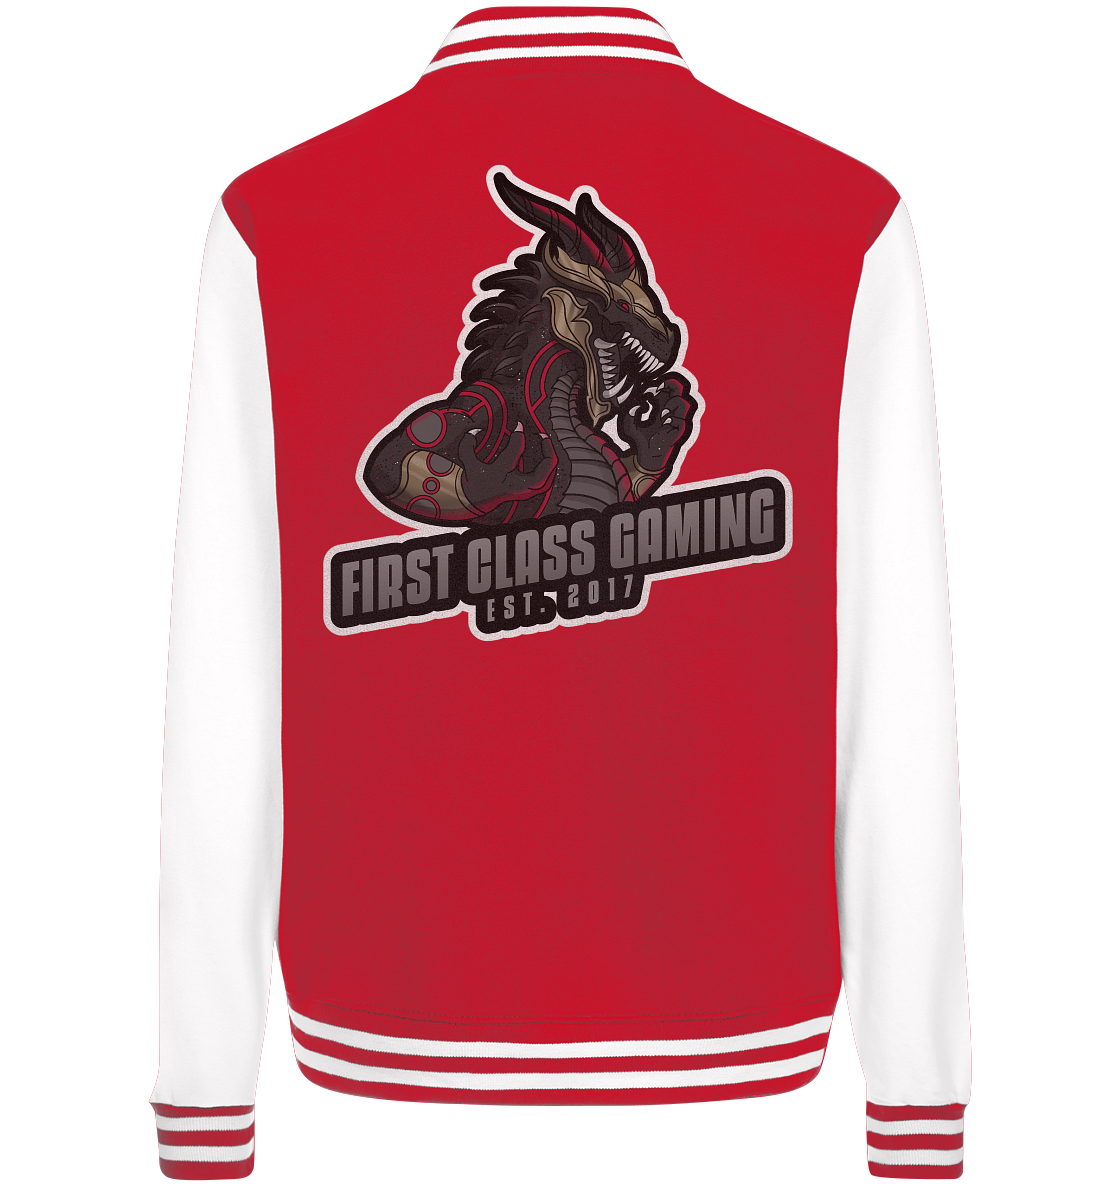 FIRST CLASS GAMING - Basic College Jacke